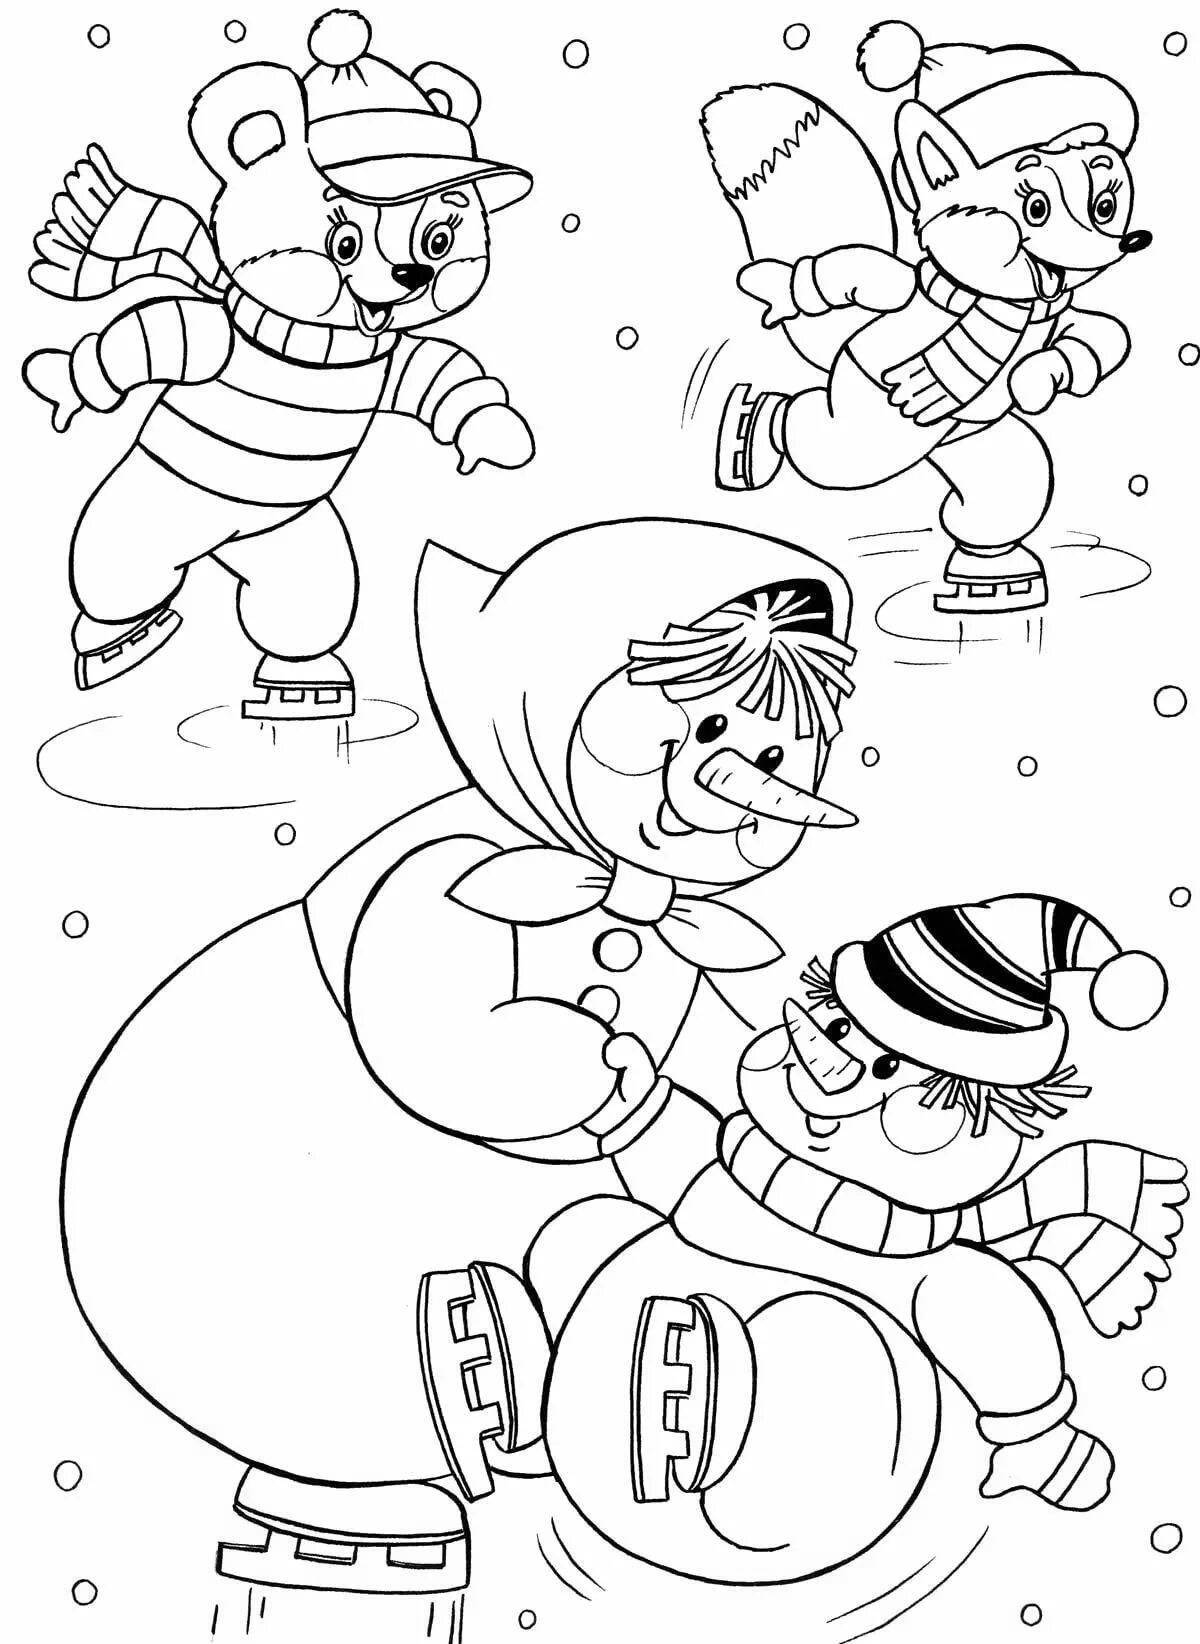 Exciting Christmas fun coloring book